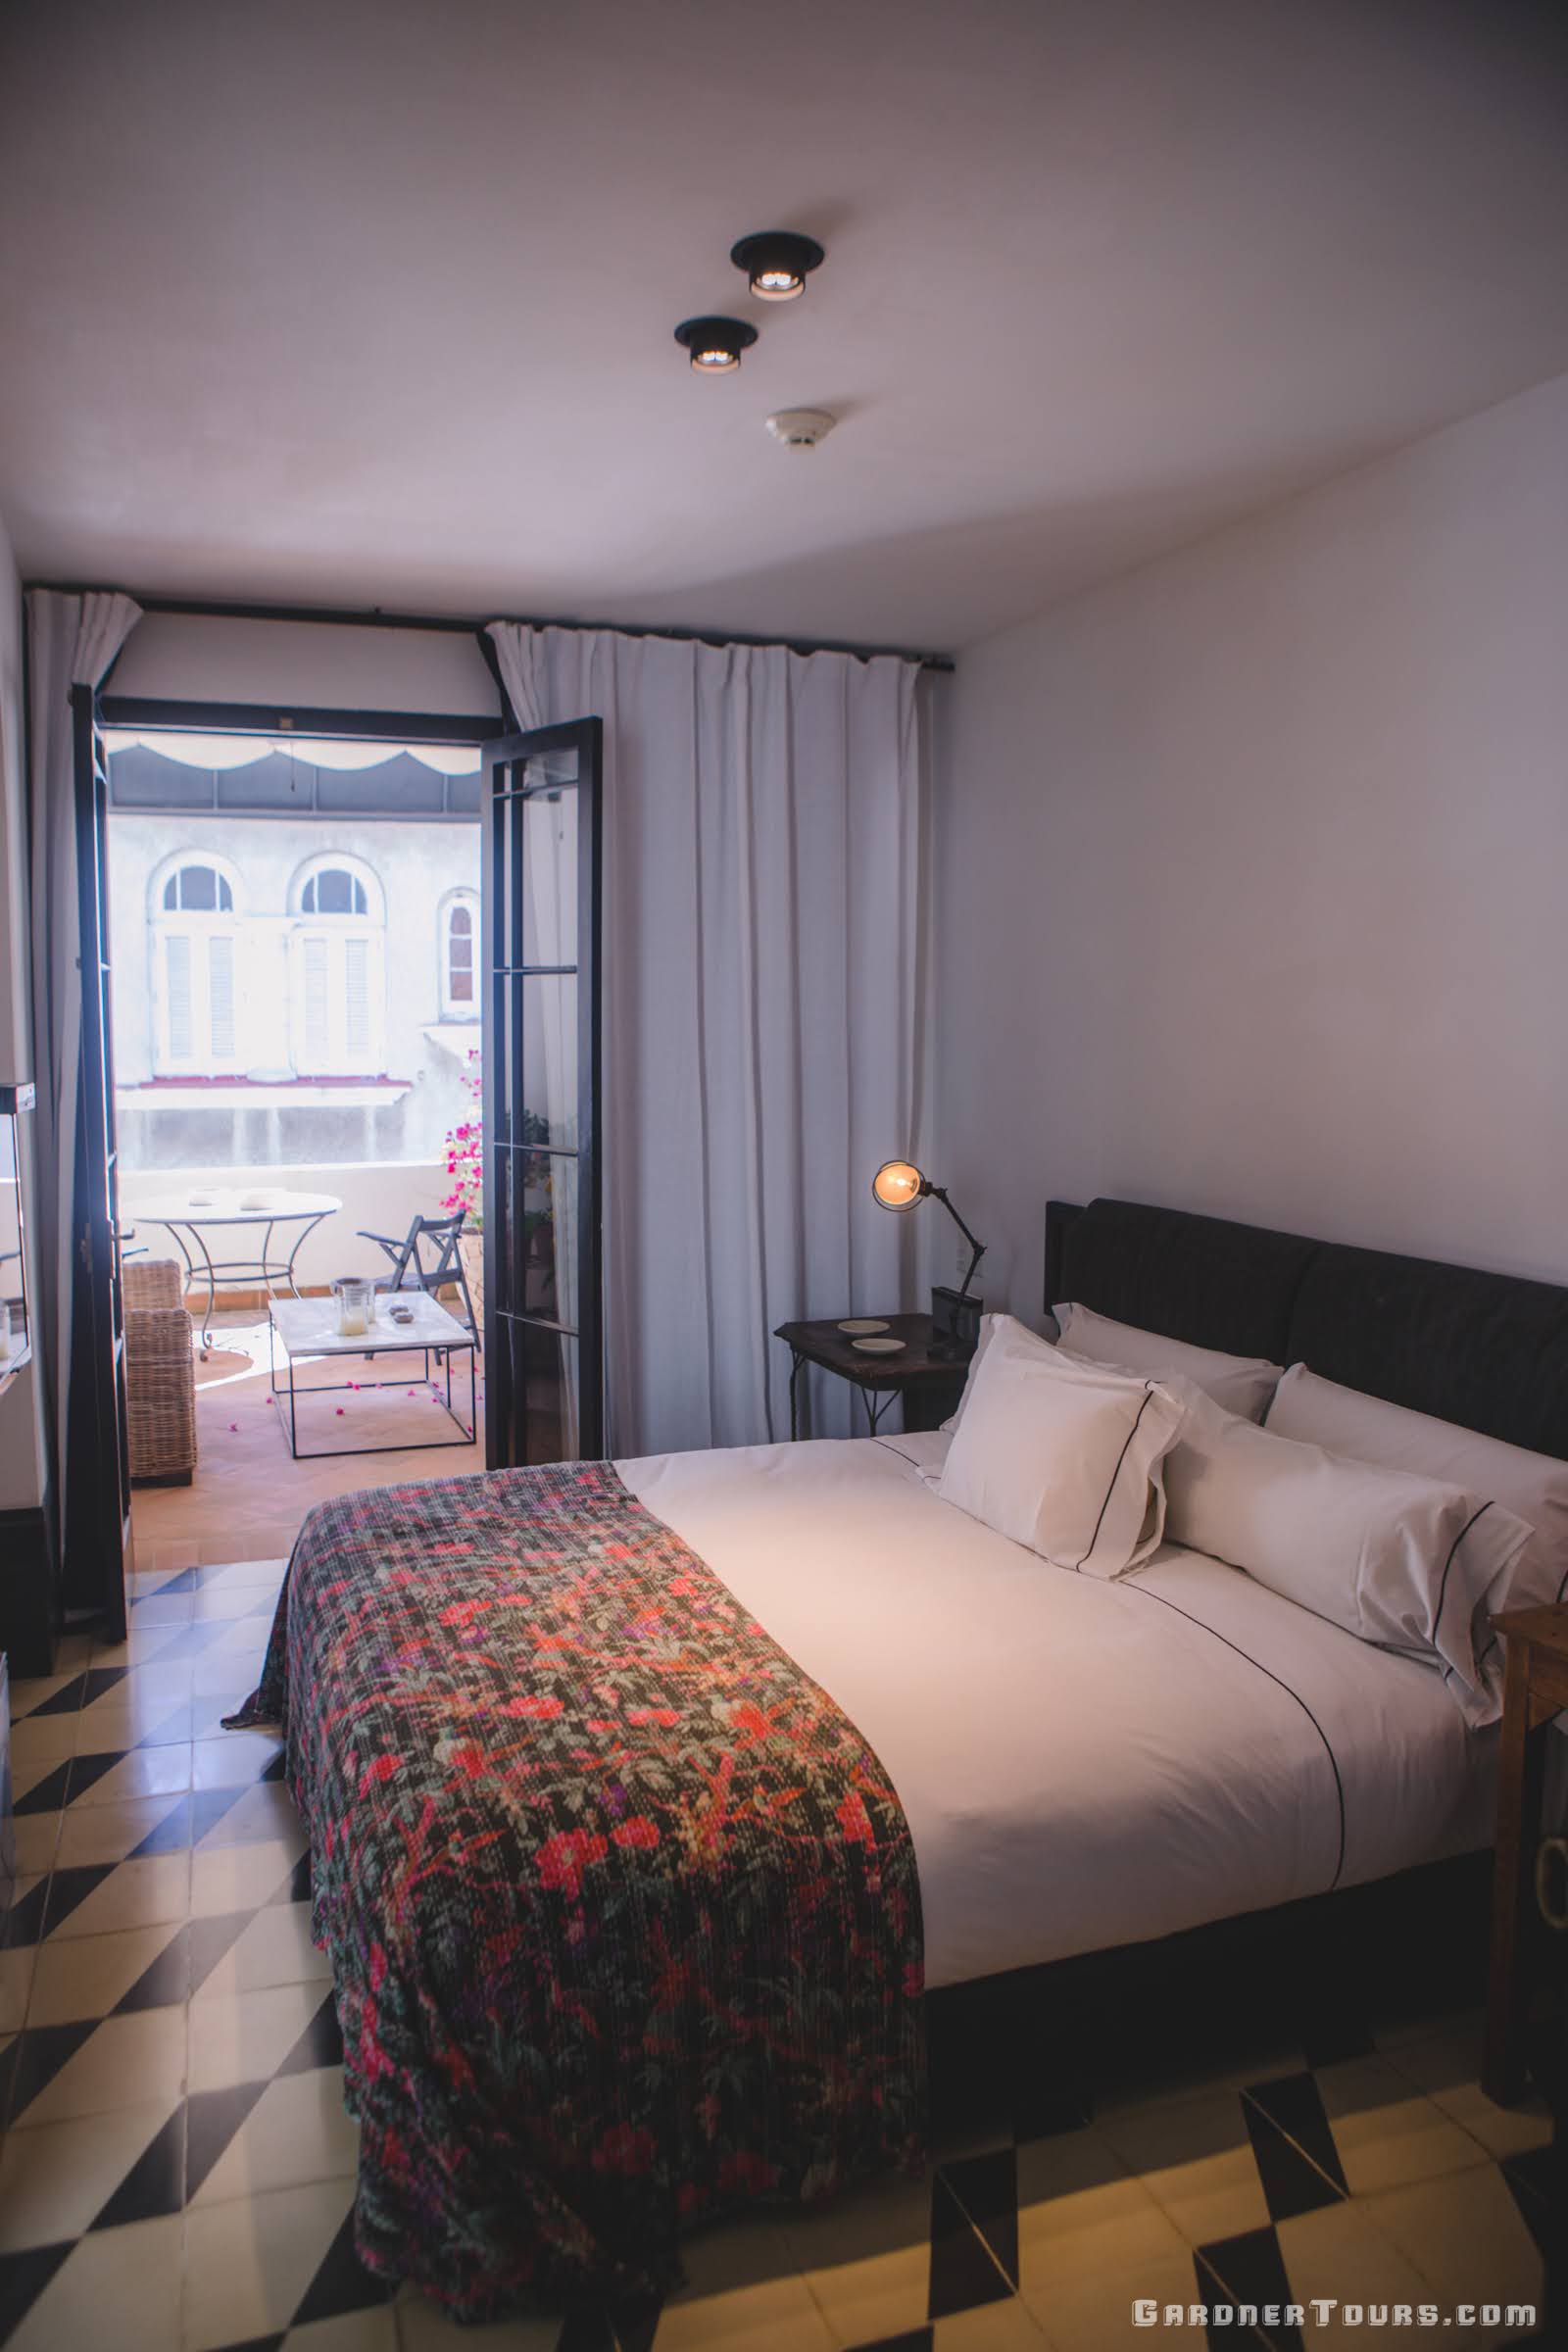 Luxury Bedroom with Lush Bed and Black, White, and Purple/Pink Flowered Decor and a Big Balcony at 5-star Luxury Accommodations in Old Havana, Cuba